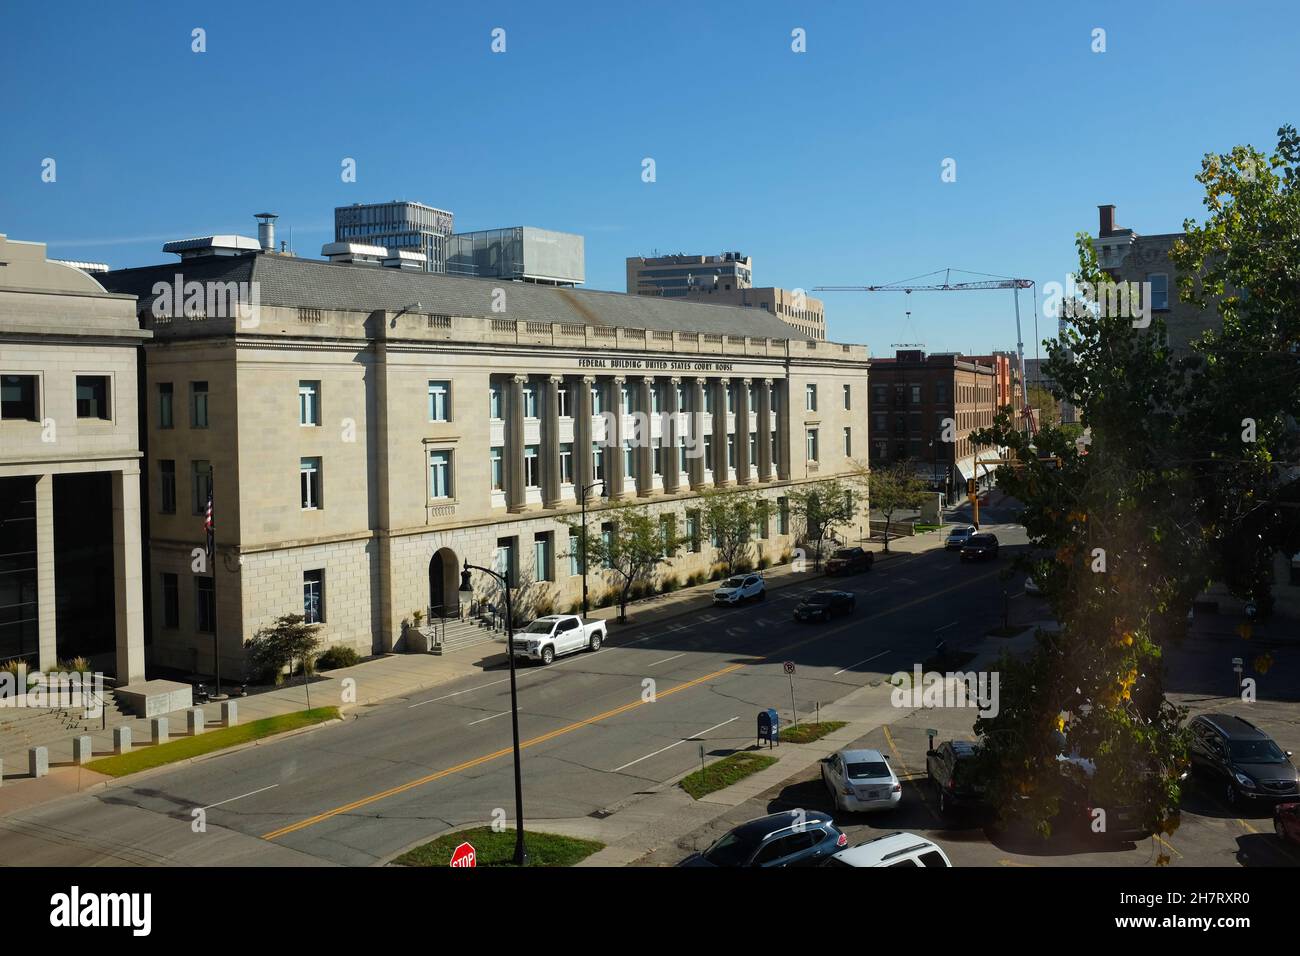 FARGO, NORTH DAKOTA - 4 OCT 2021: The Quentin N. Burdick U.S. Courthouse, at the corner of First Avenue and Roberts Street. Stock Photo